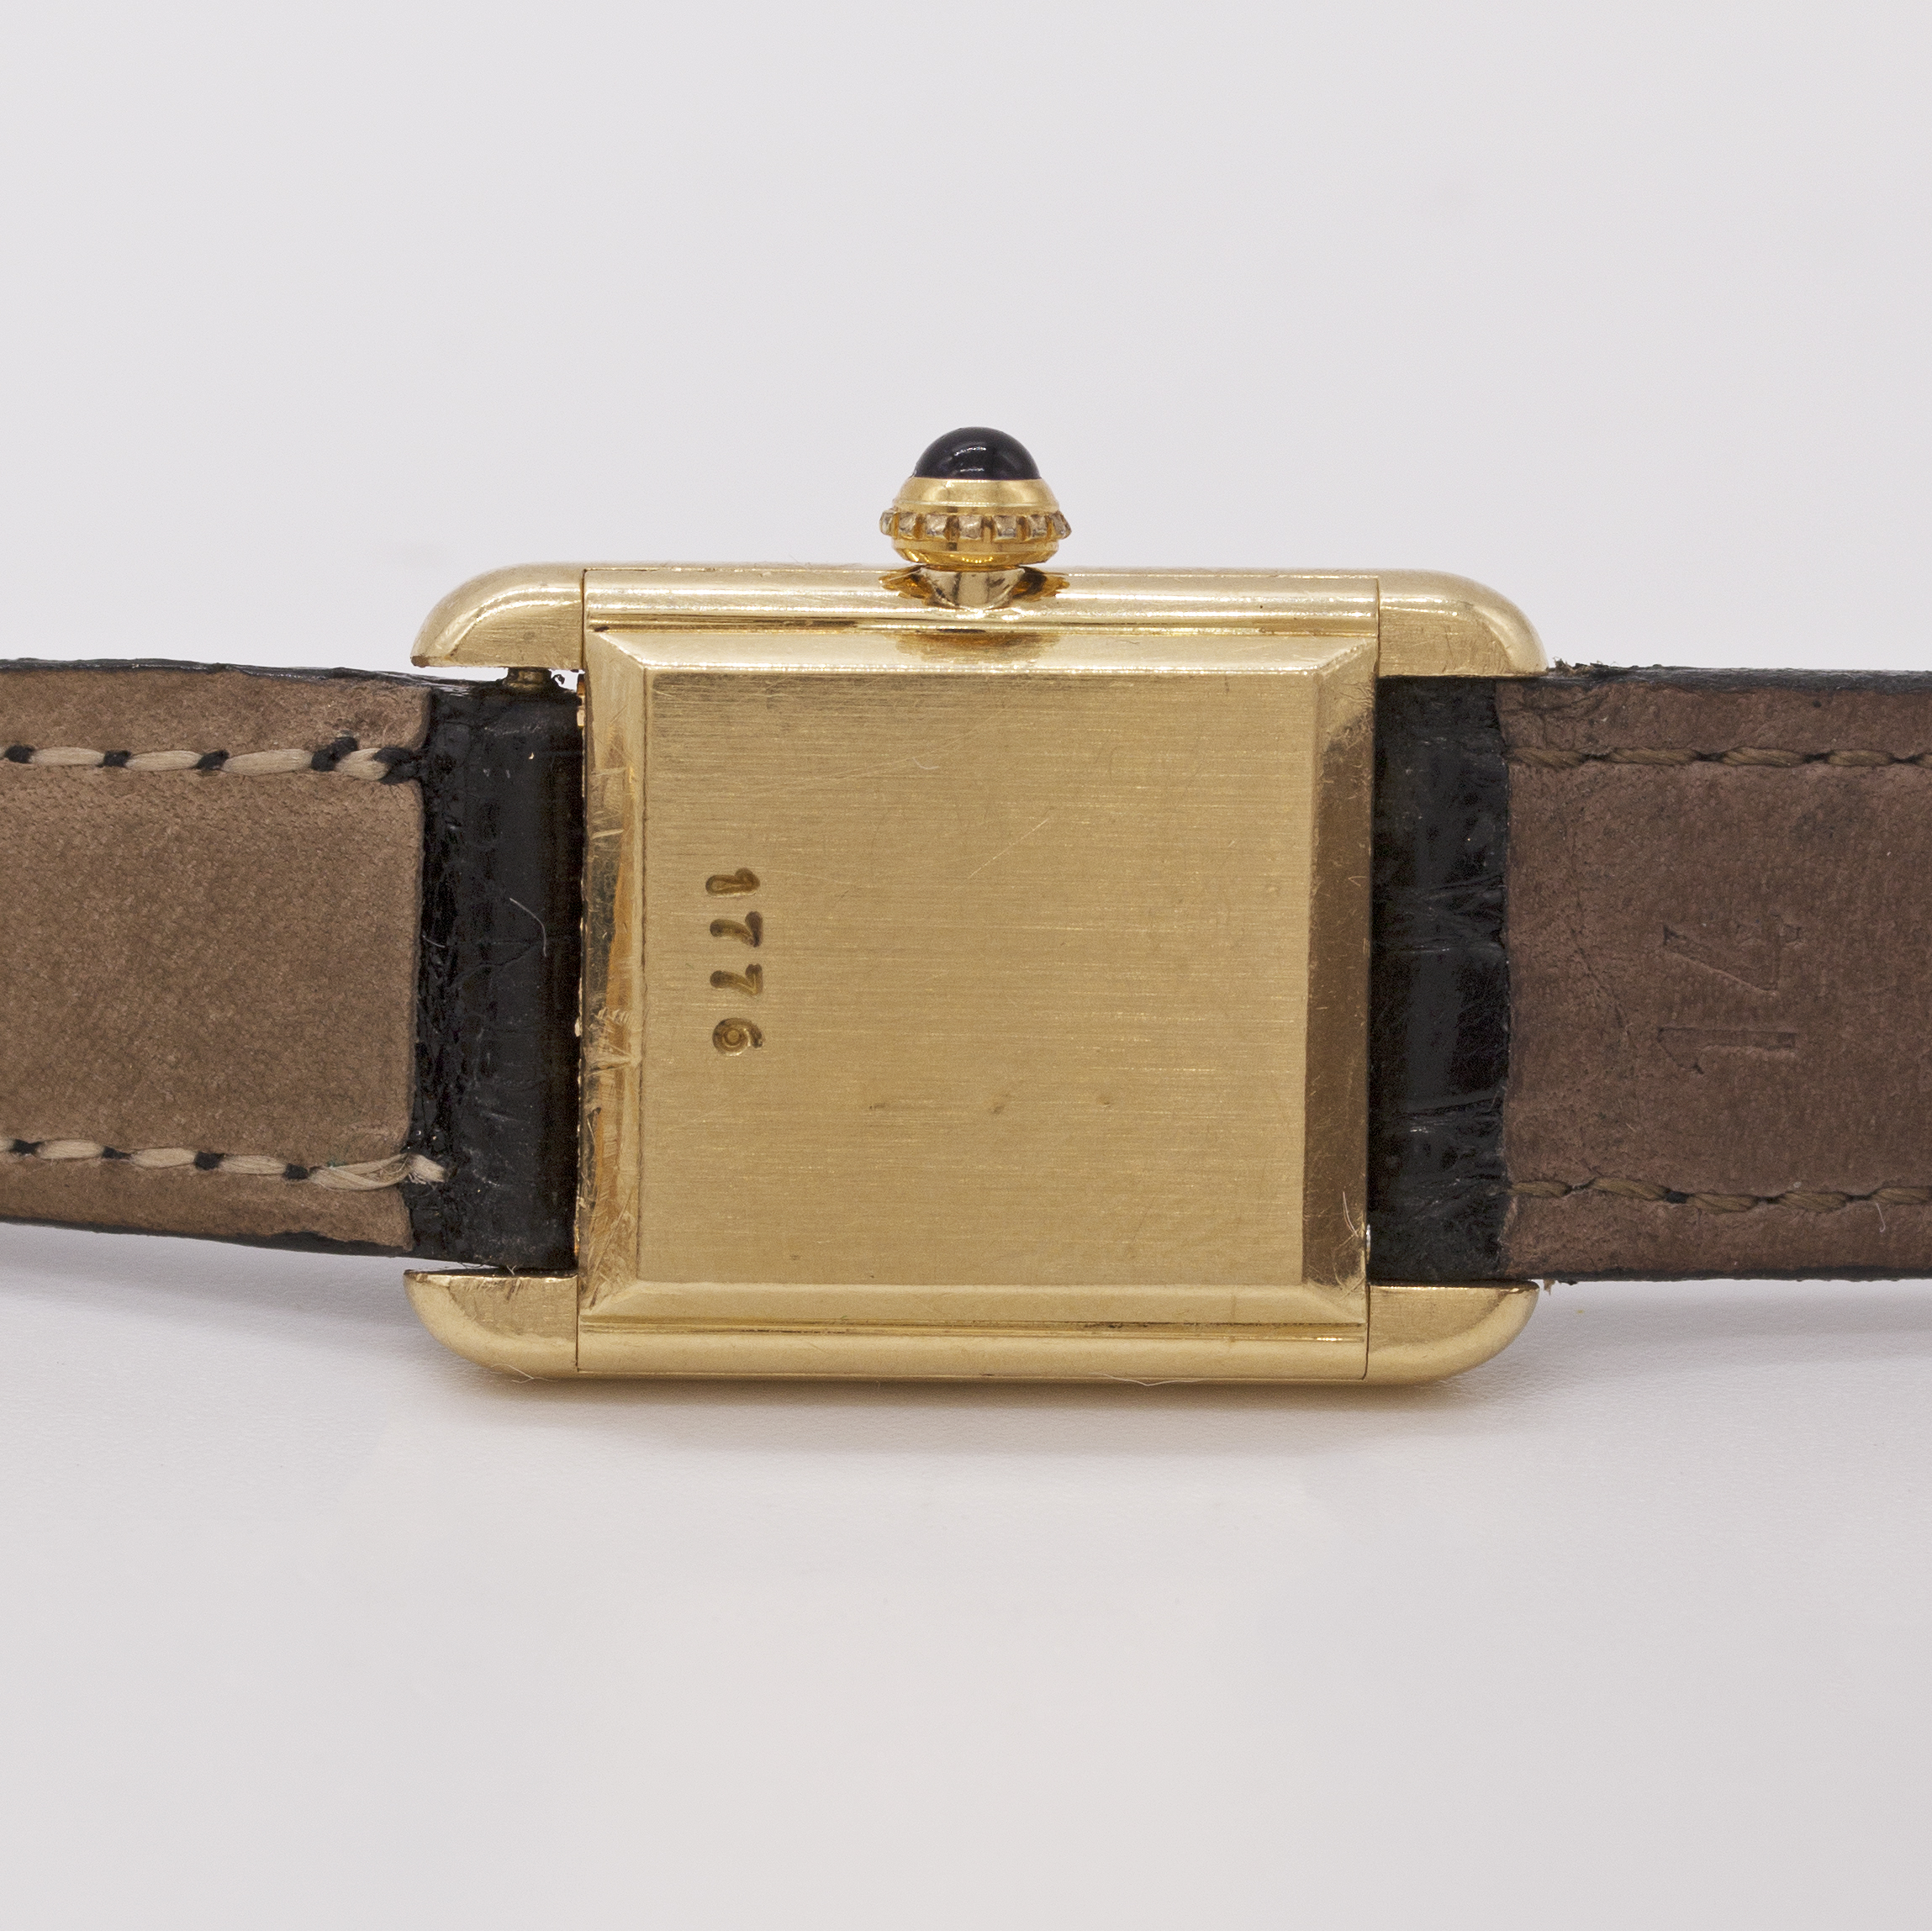 A RARE LADIES 18K SOLID GOLD CARTIER LONDON TANK "LC" WRIST WATCH CIRCA 1975, WITH LONDON - Image 7 of 14